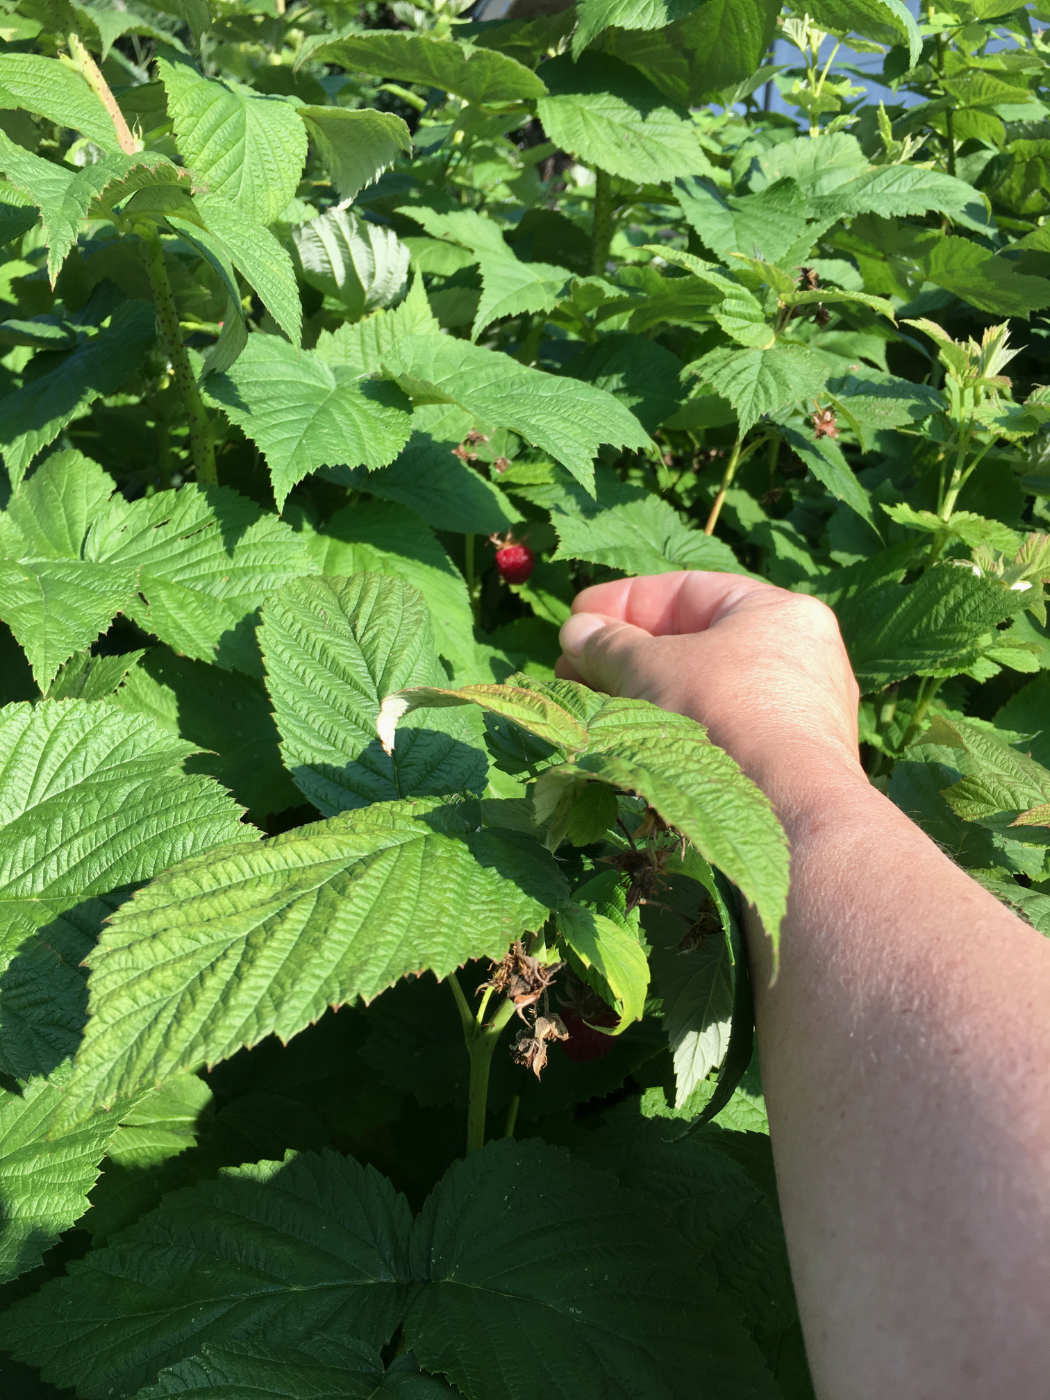 hand reaching into picture to pick a red berry under large green leaves